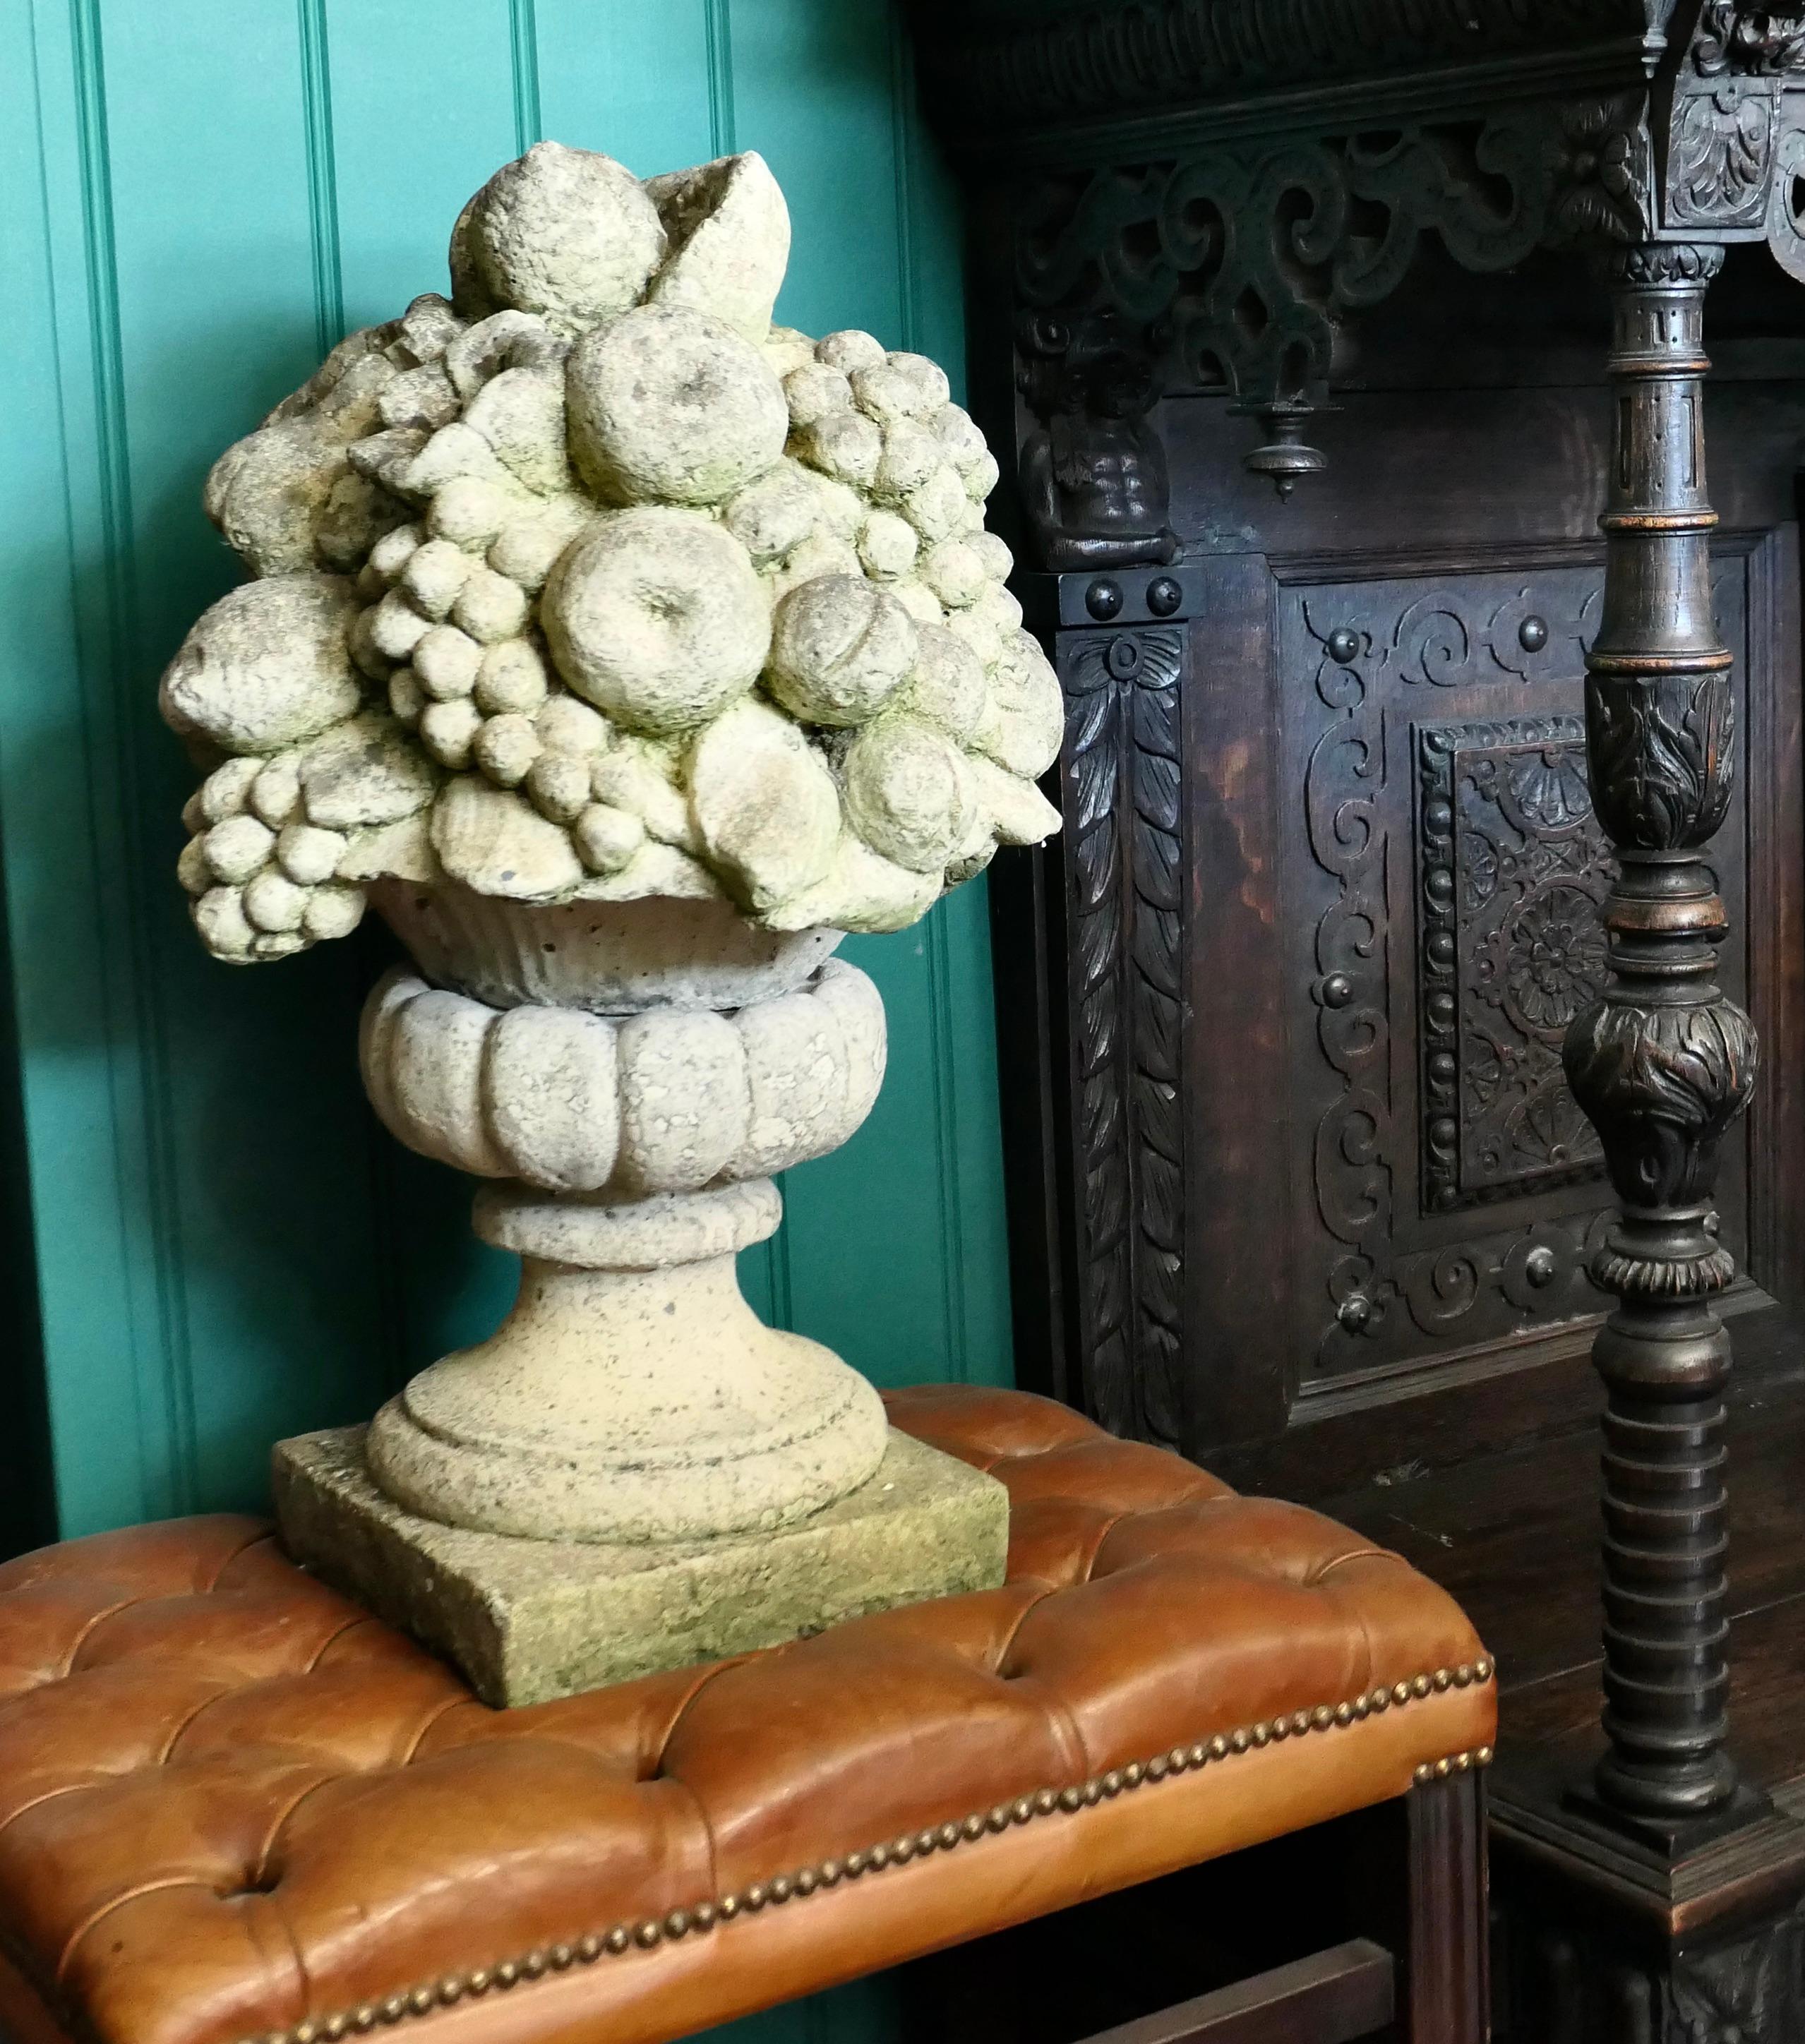 A Large Italian Carved Limestone fruit basket

Baskets like this one have traditionally found their place in Europe in Chateaux and Manor Houses, most commonly in a semi indoor setting like a garden room or entrance 
The fruit bowl is set with